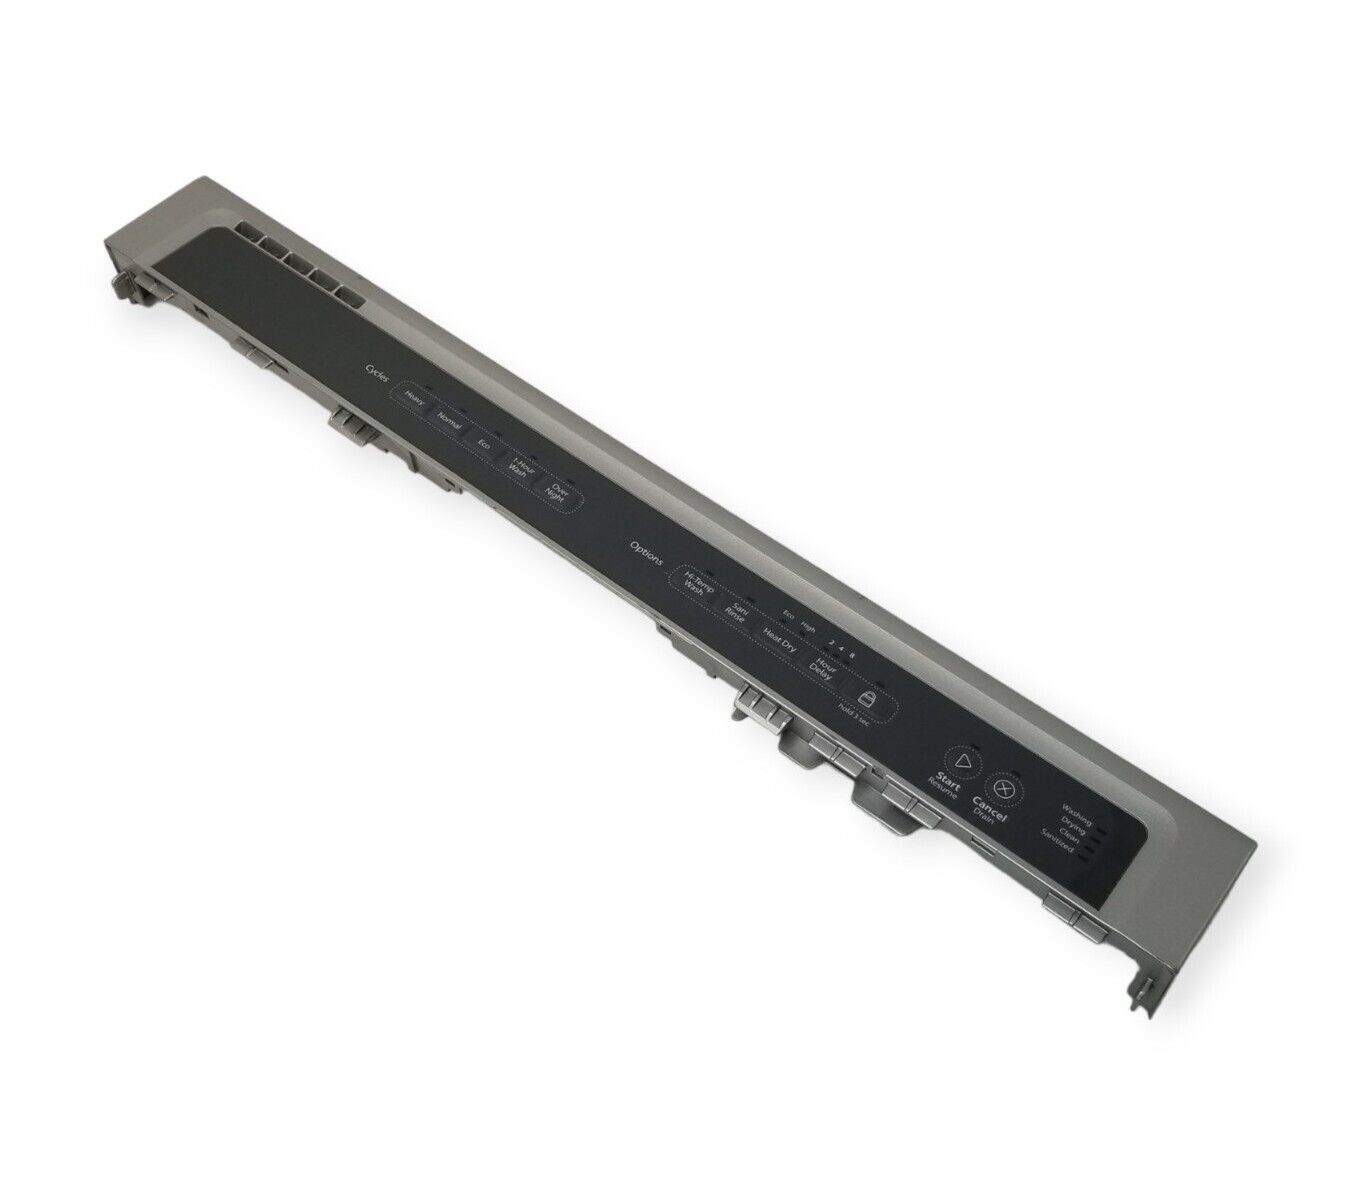 Genuine OEM Replacement for Whirlpool Dishwasher Panel W10321837